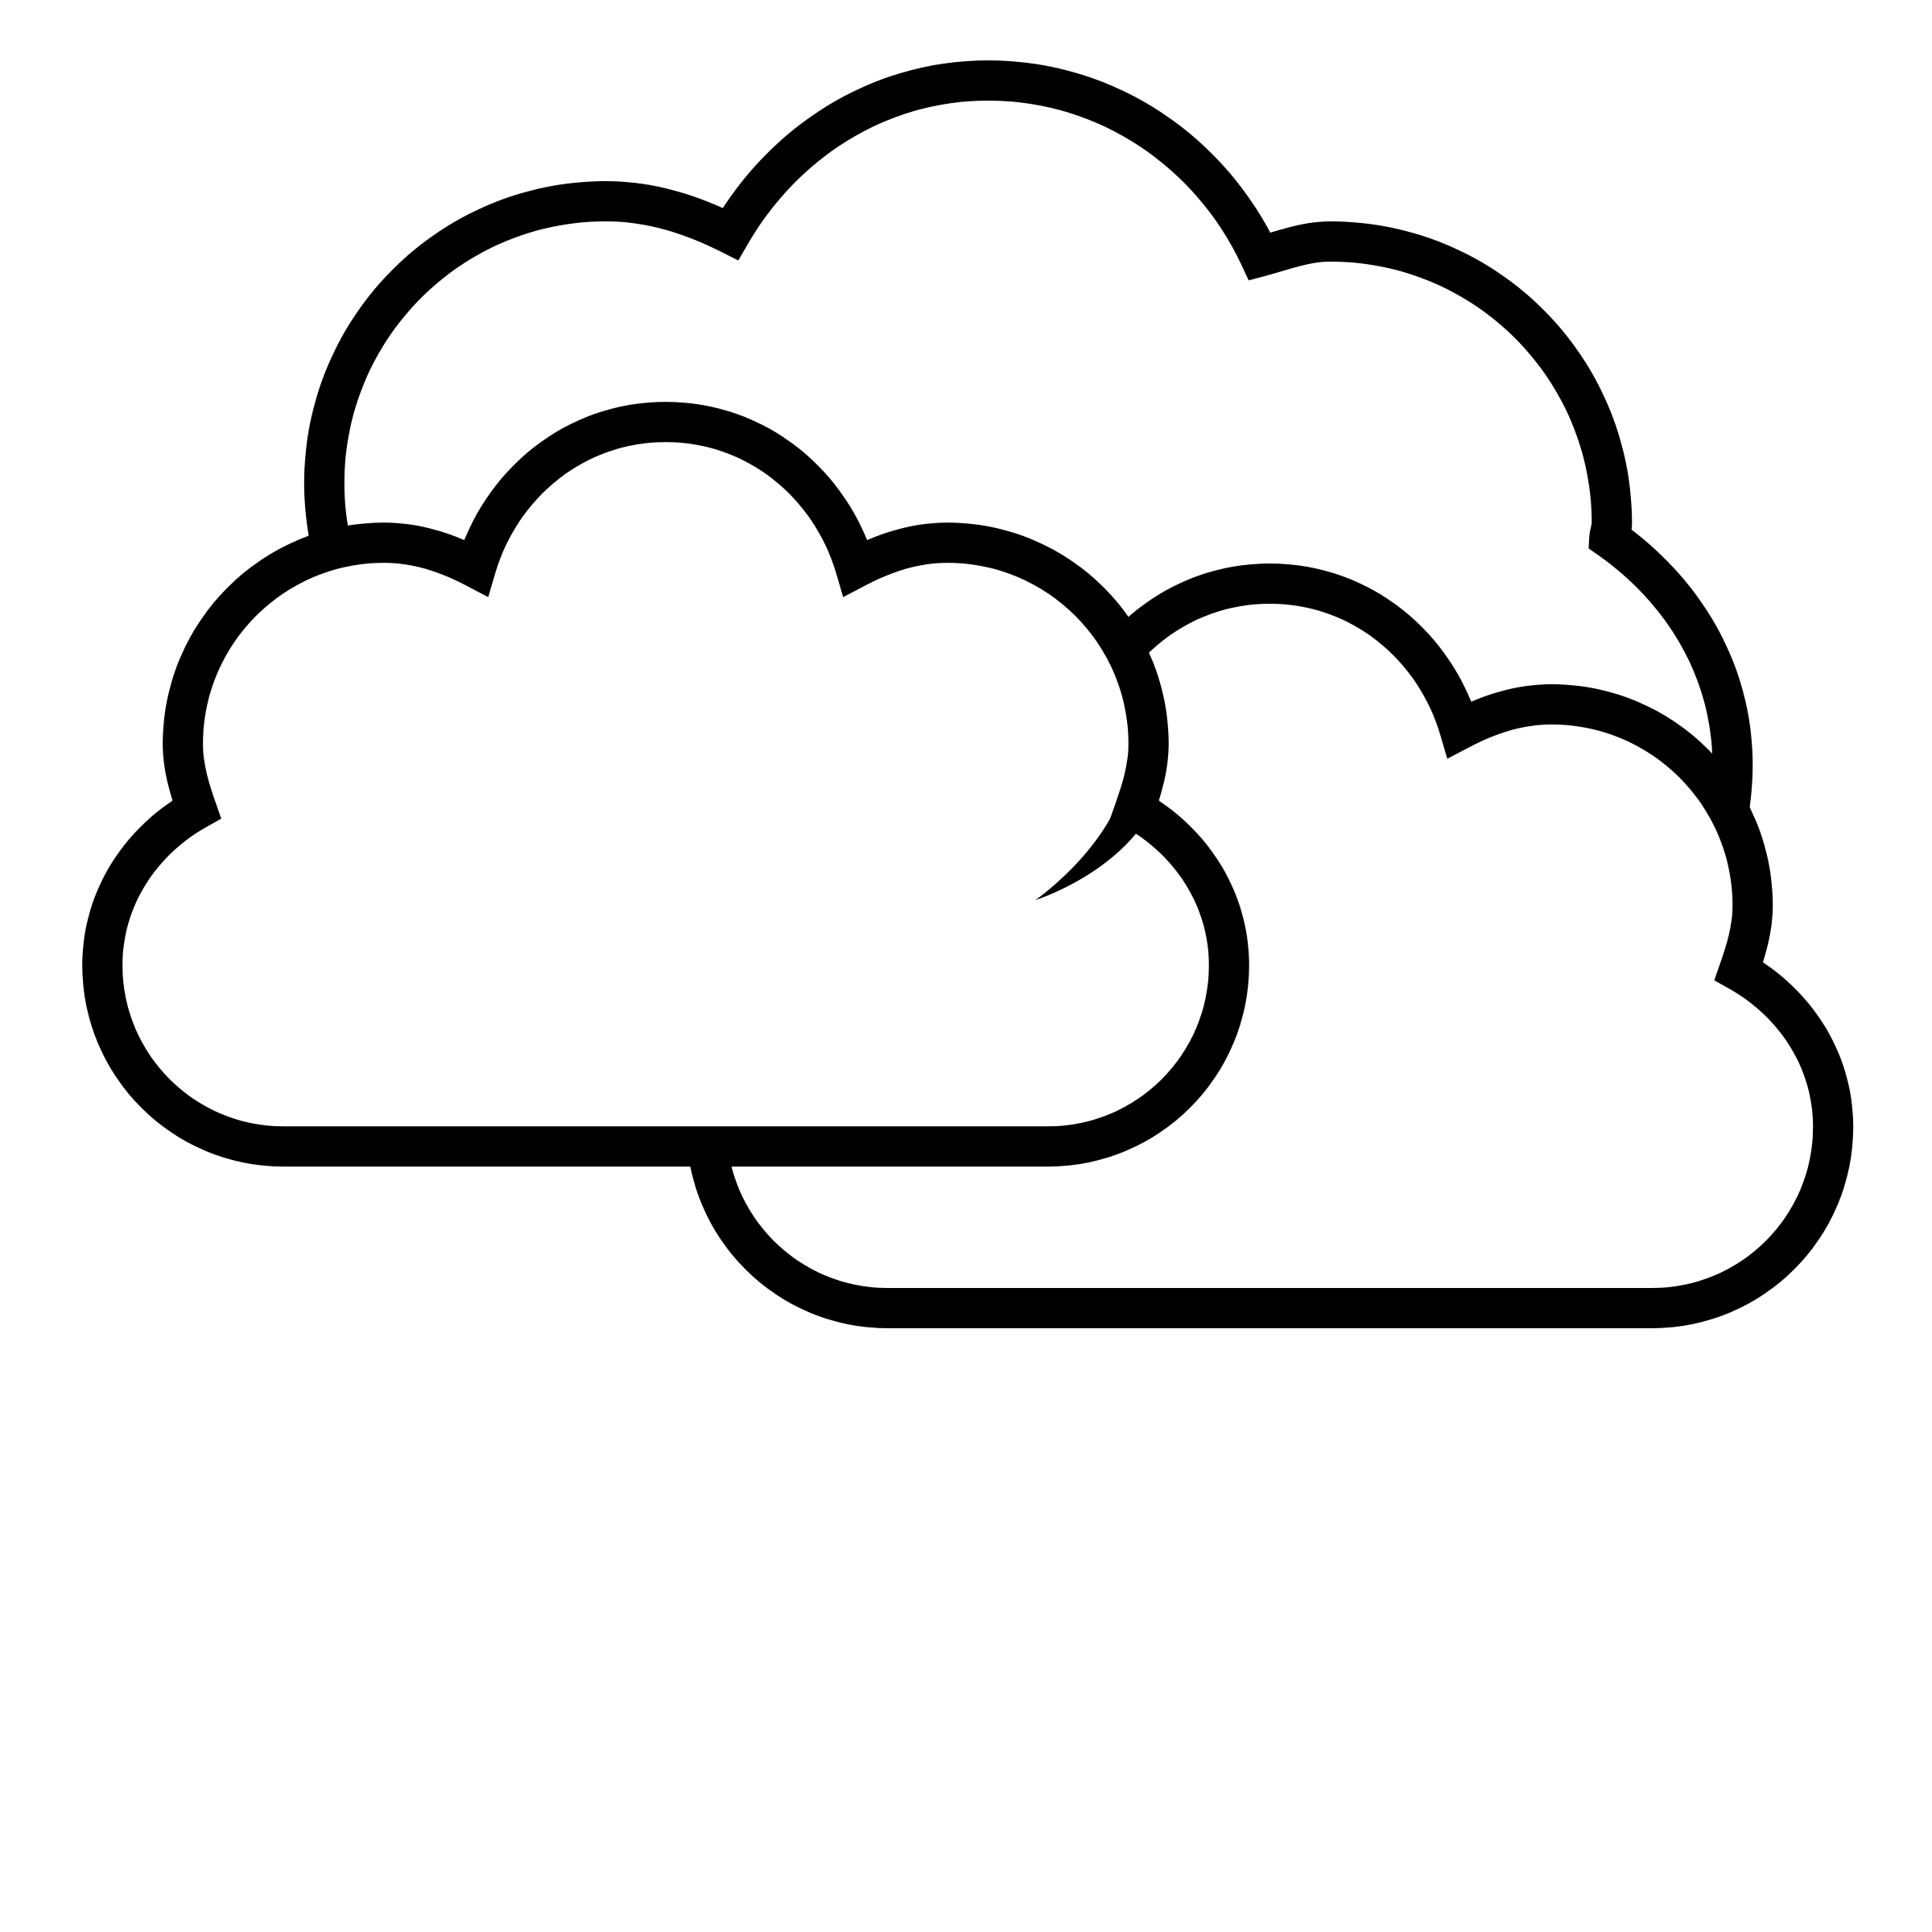 Partly cloudy clipart 13